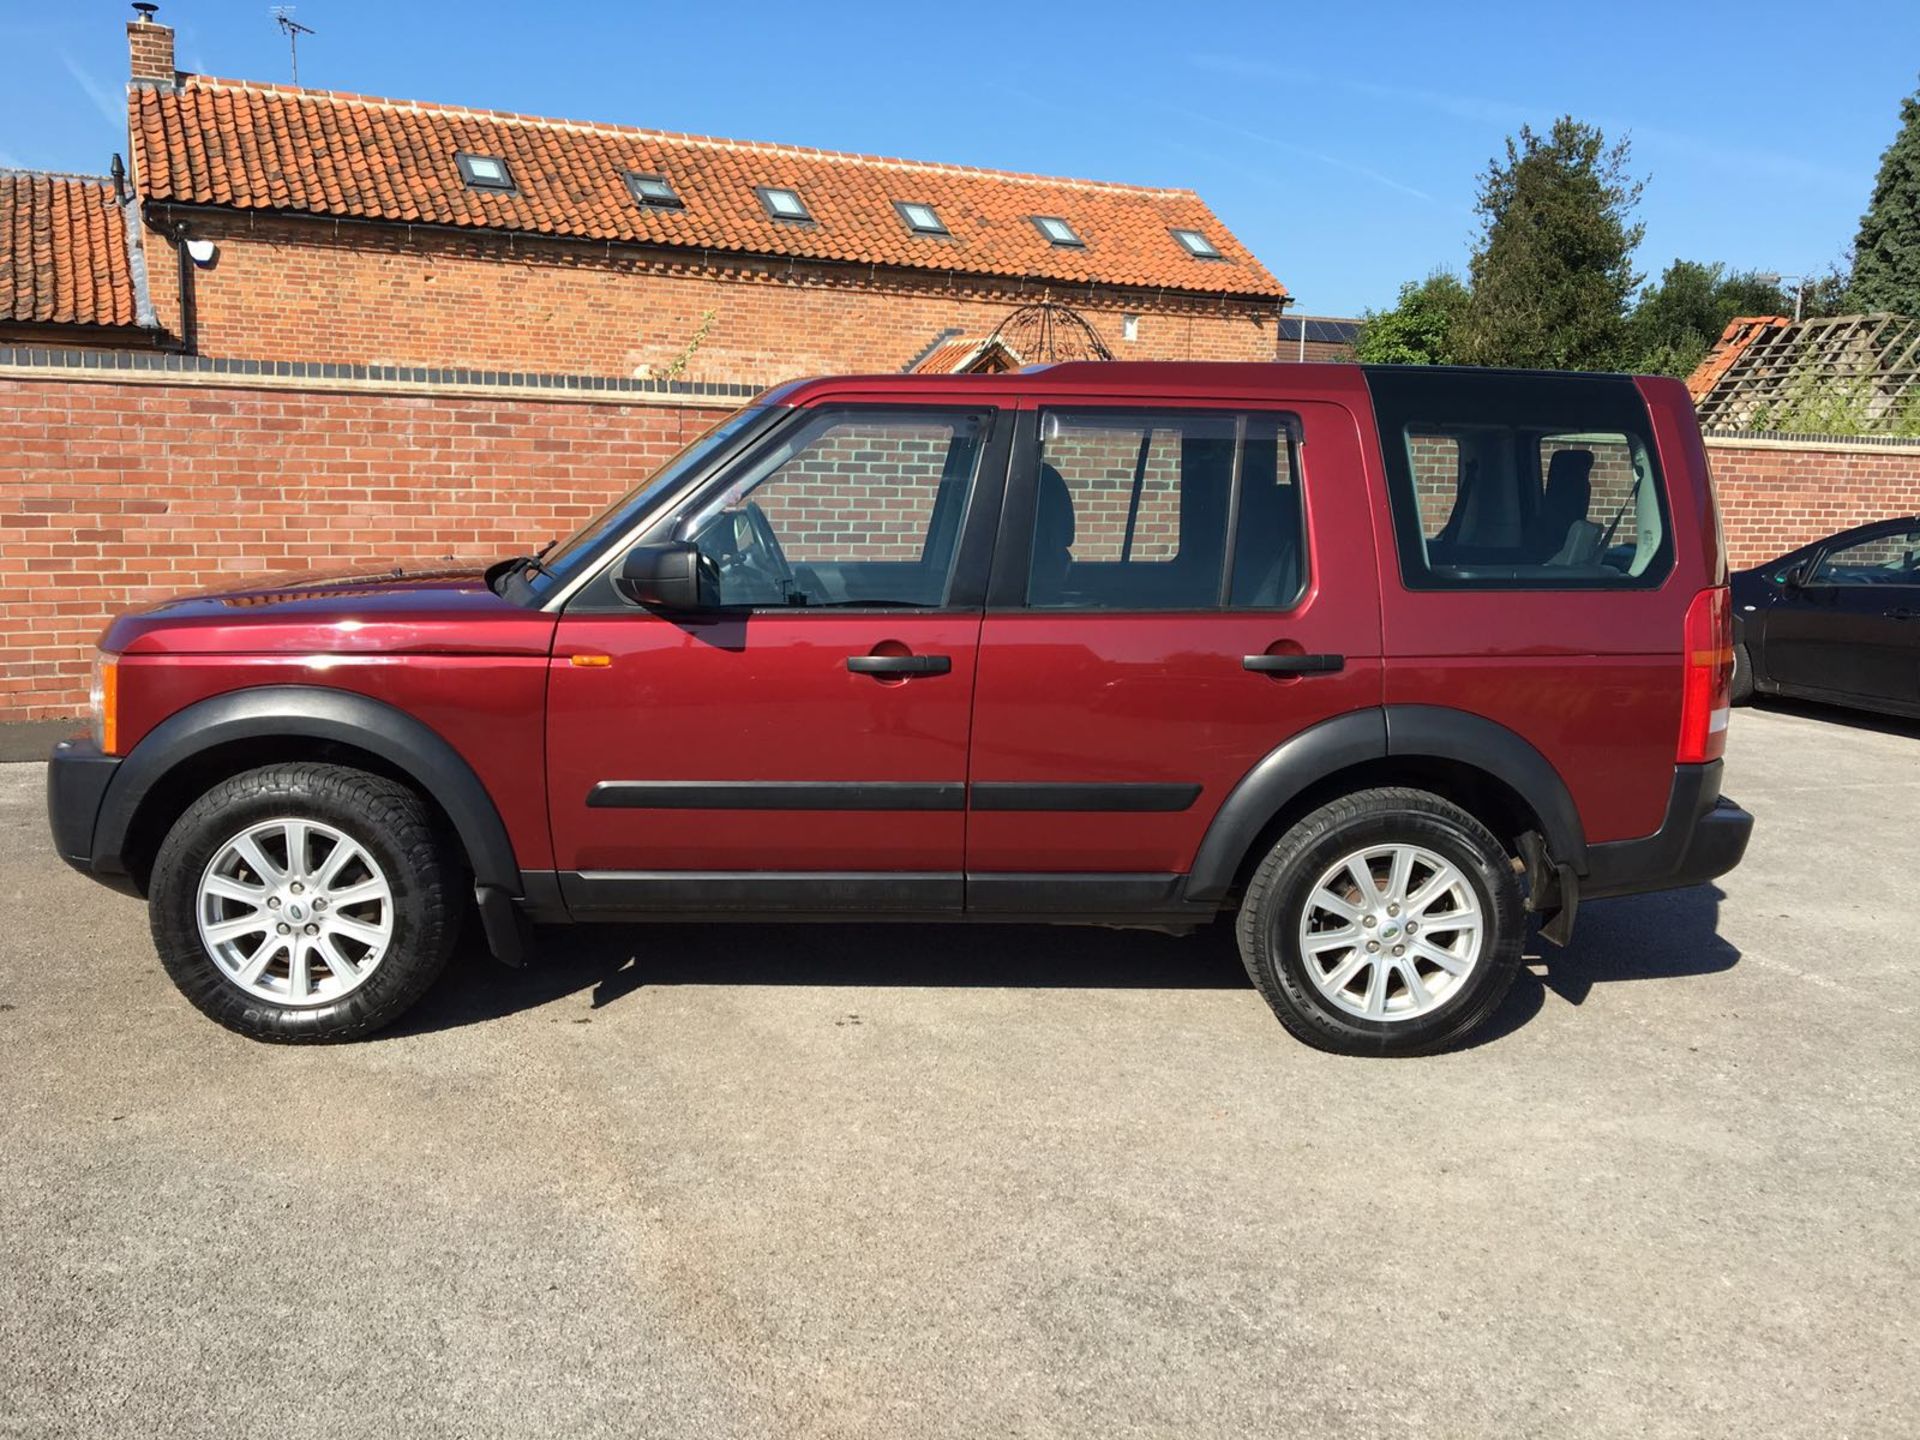 2005/54 REG LAND ROVER DISCOVERY 3 TDV6 S 7 SEATER - 1 FORMER KEEPER *NO VAT* - Image 4 of 12